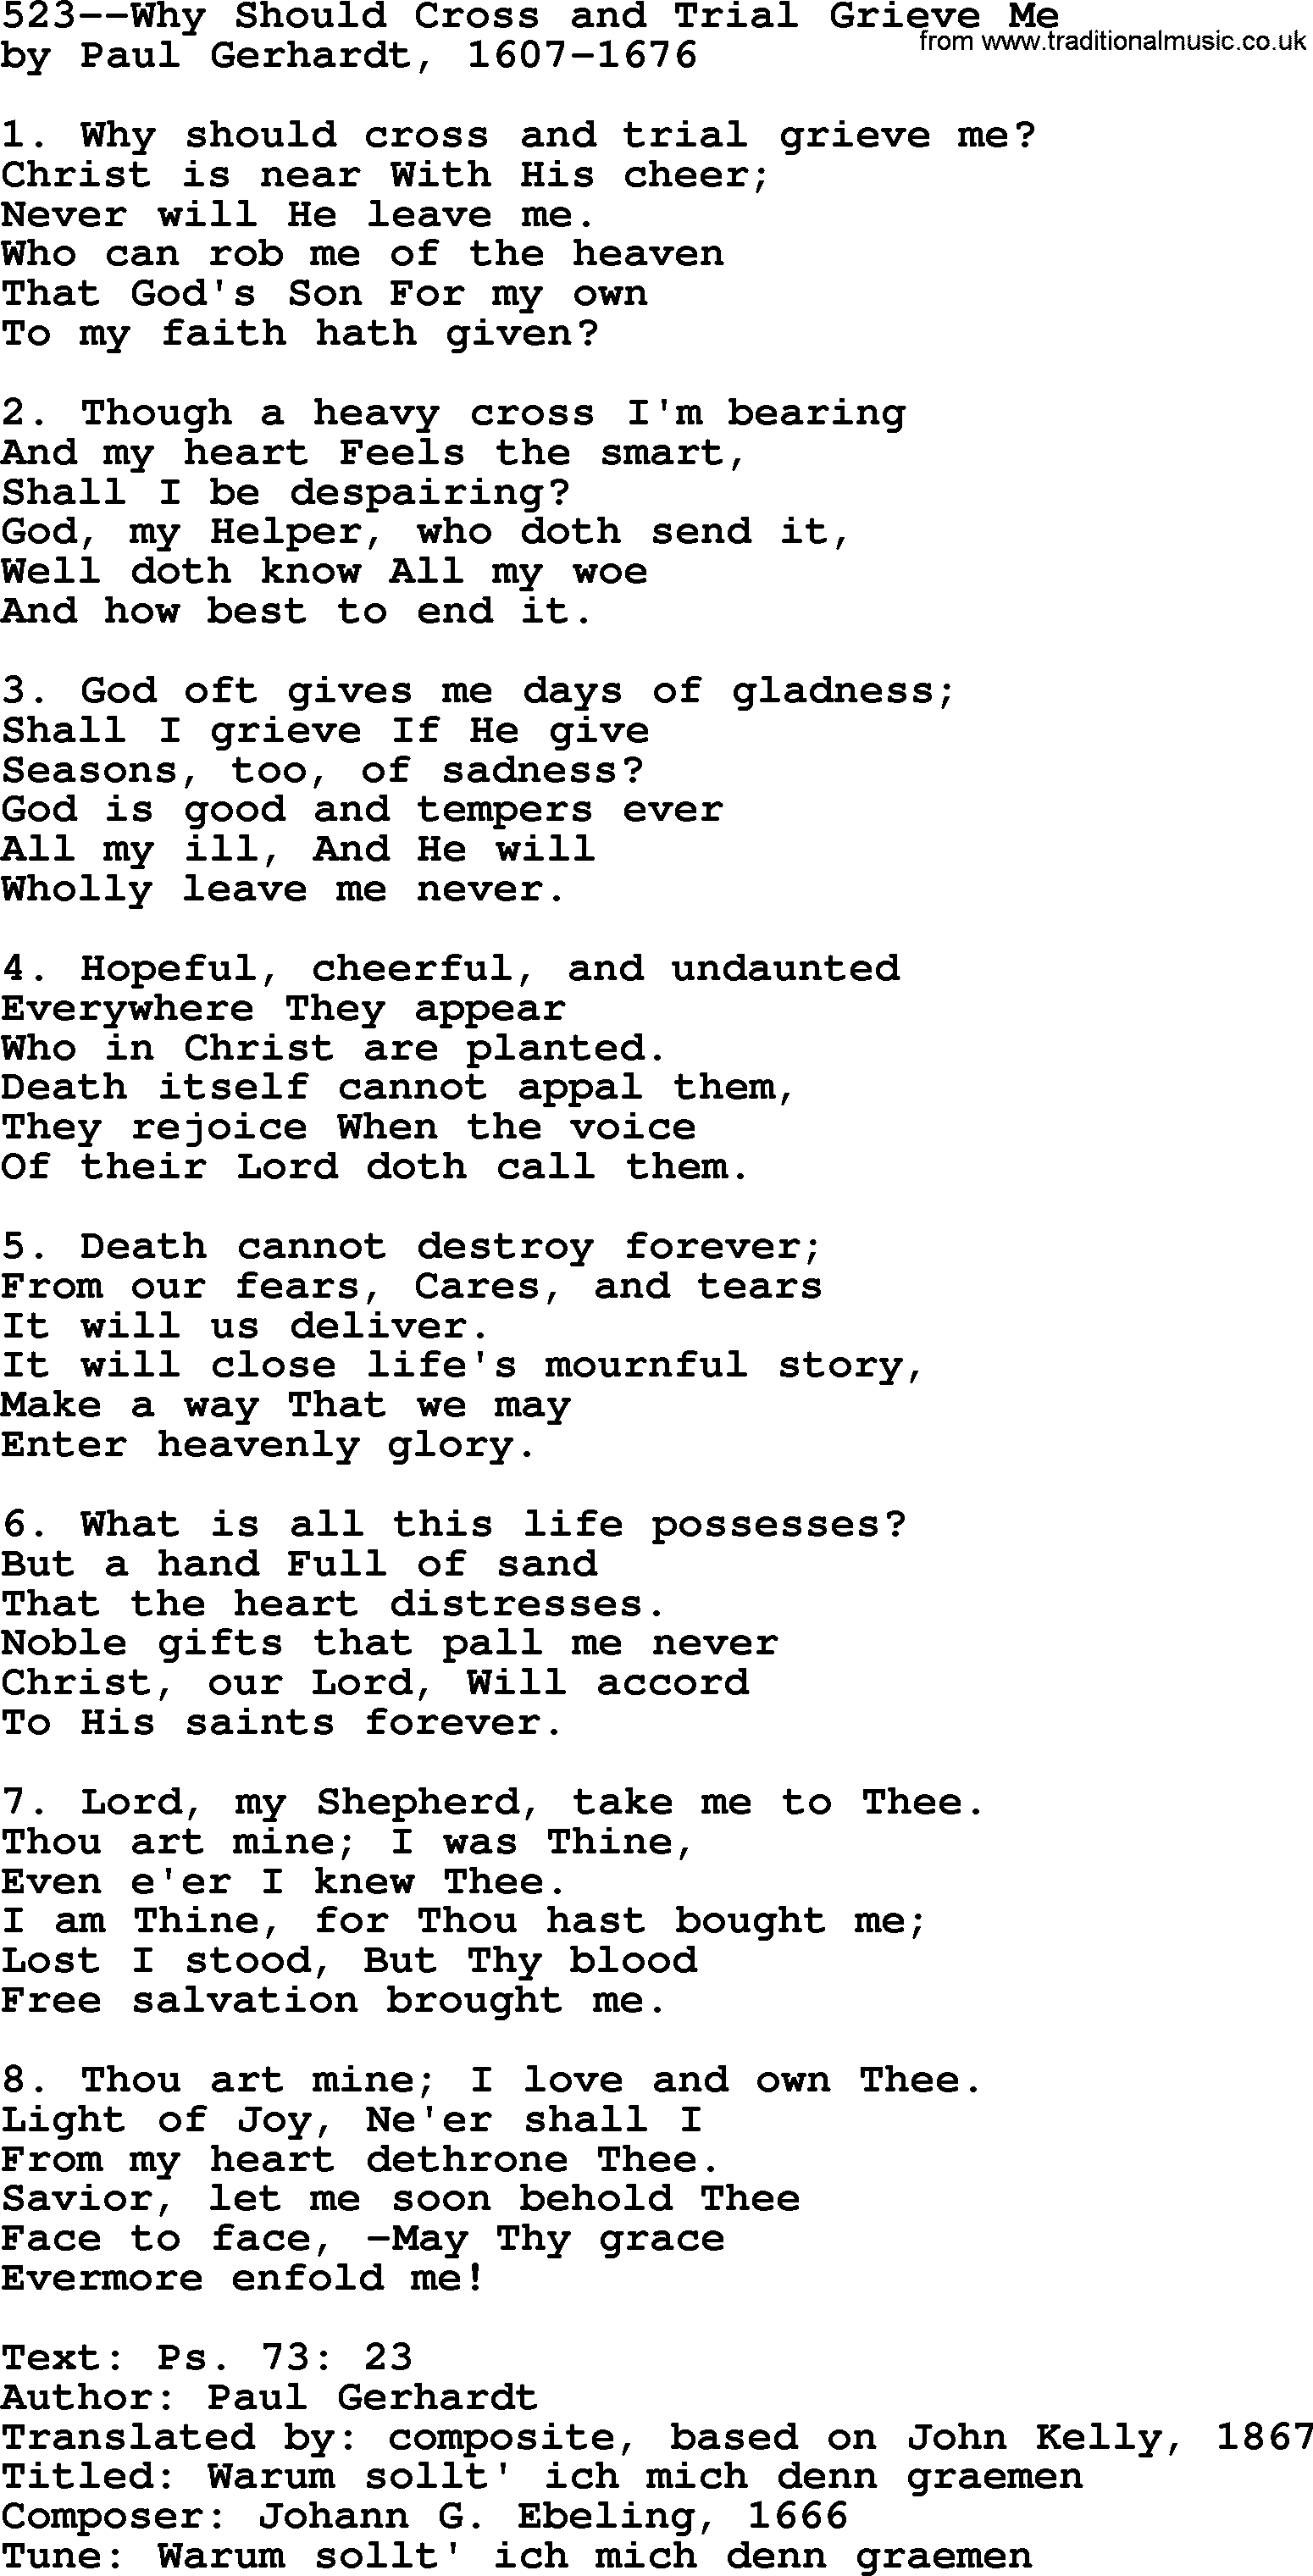 Lutheran Hymn: 523--Why Should Cross and Trial Grieve Me.txt lyrics with PDF